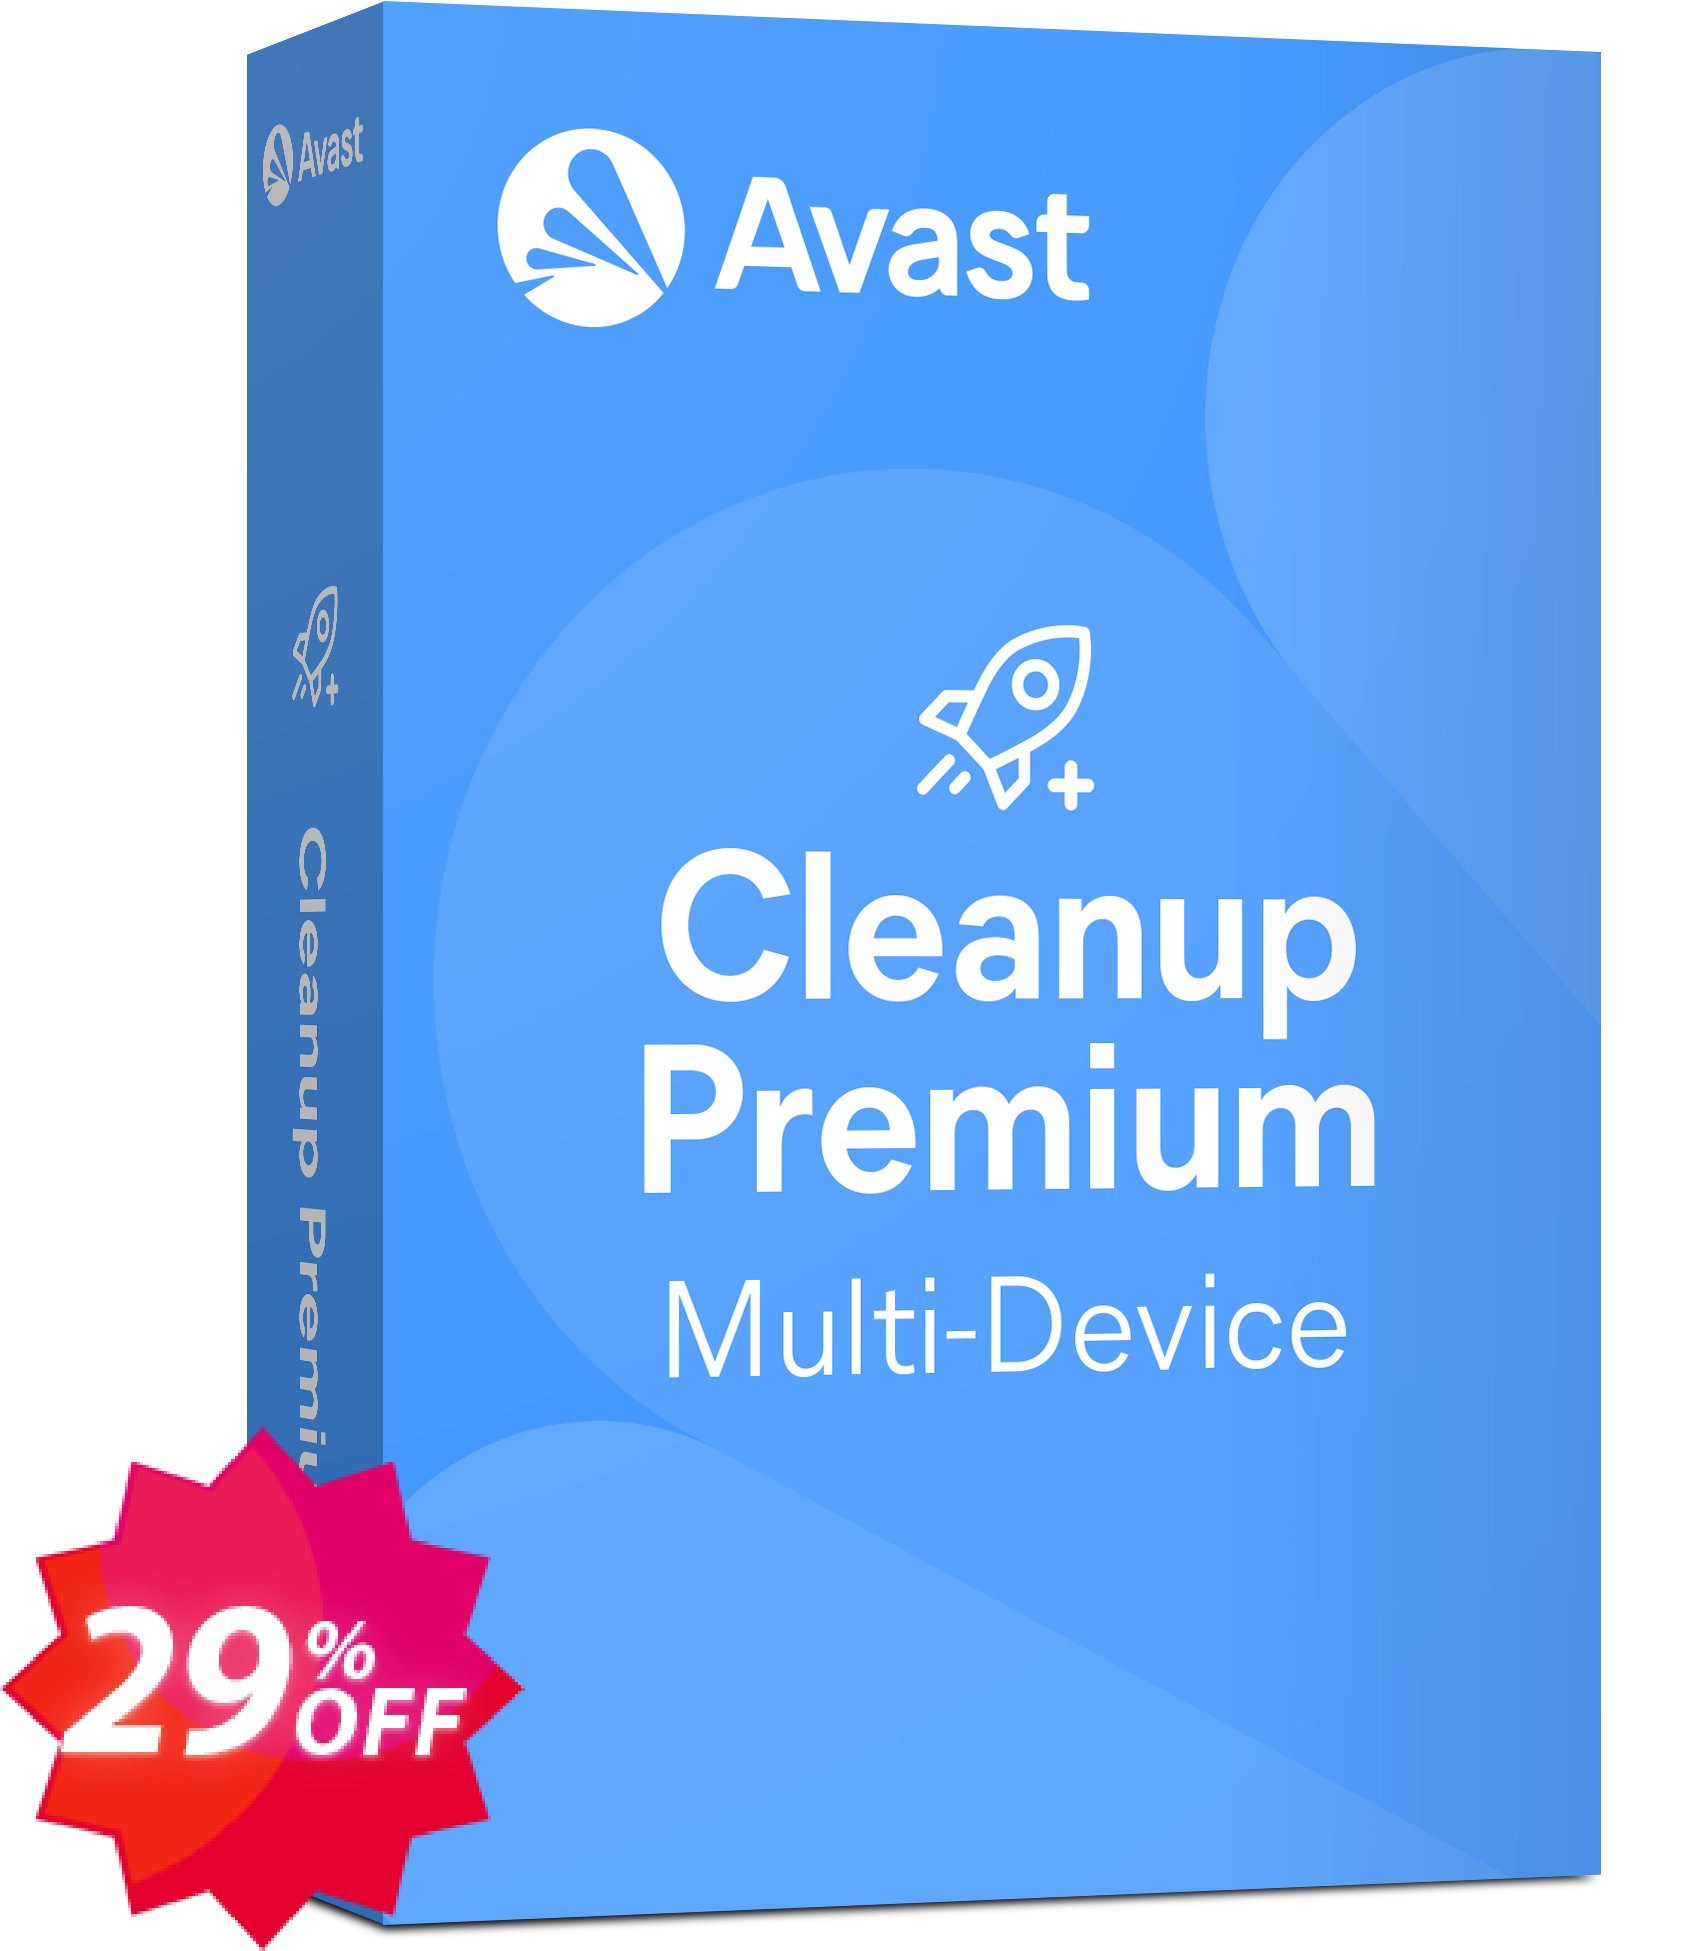 Avast Cleanup Premium 10 Devices Coupon code 29% discount 